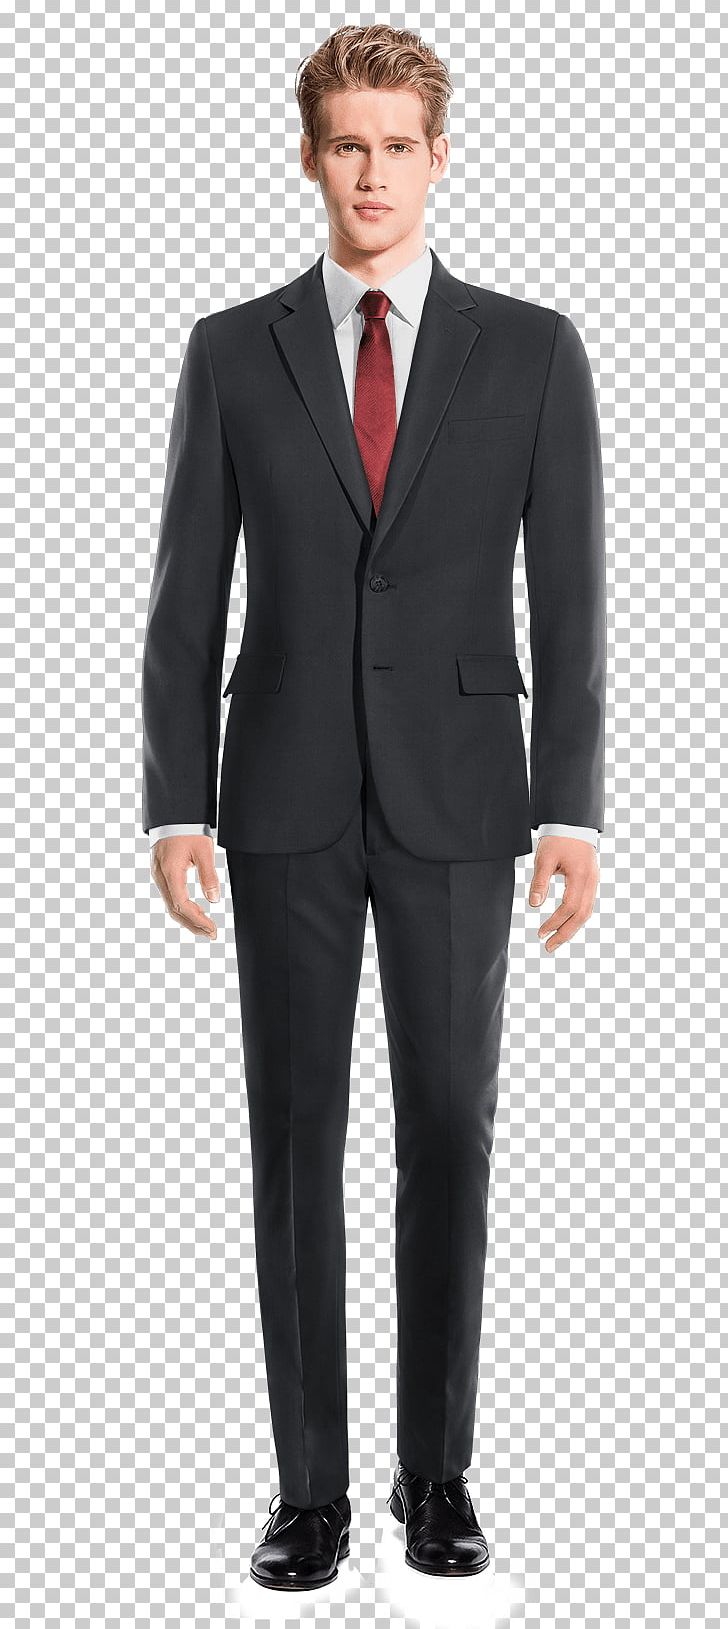 Suit Tweed Necktie Pants Wool PNG, Clipart, Blazer, Business, Businessperson, Clothing, Dress Shirt Free PNG Download